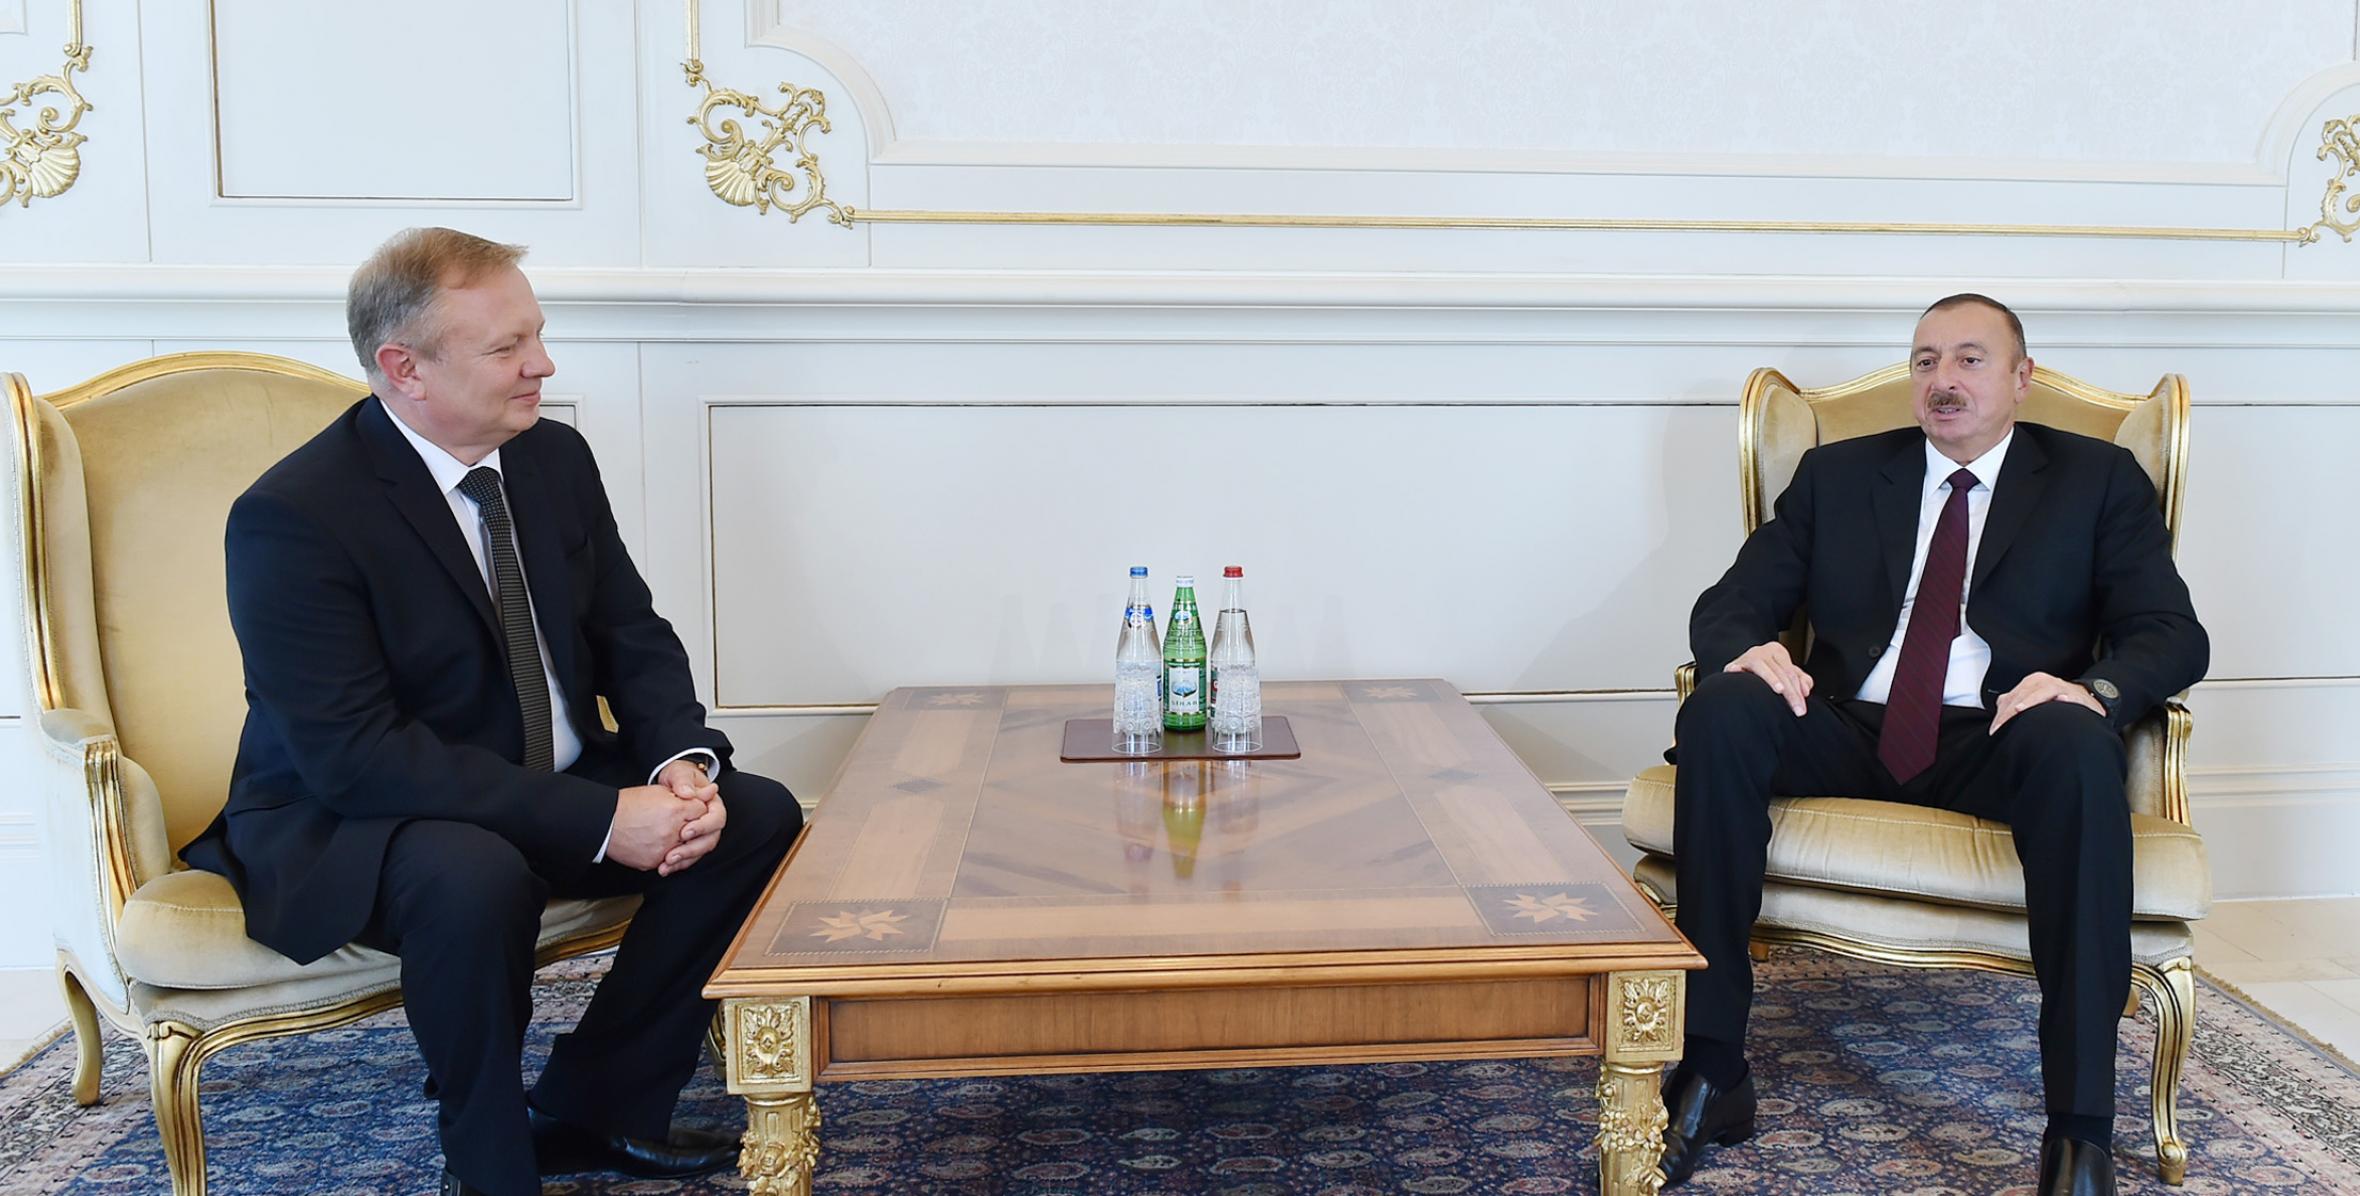 Ilham Aliyev received the credentials of the incoming Ambassador of Belarus